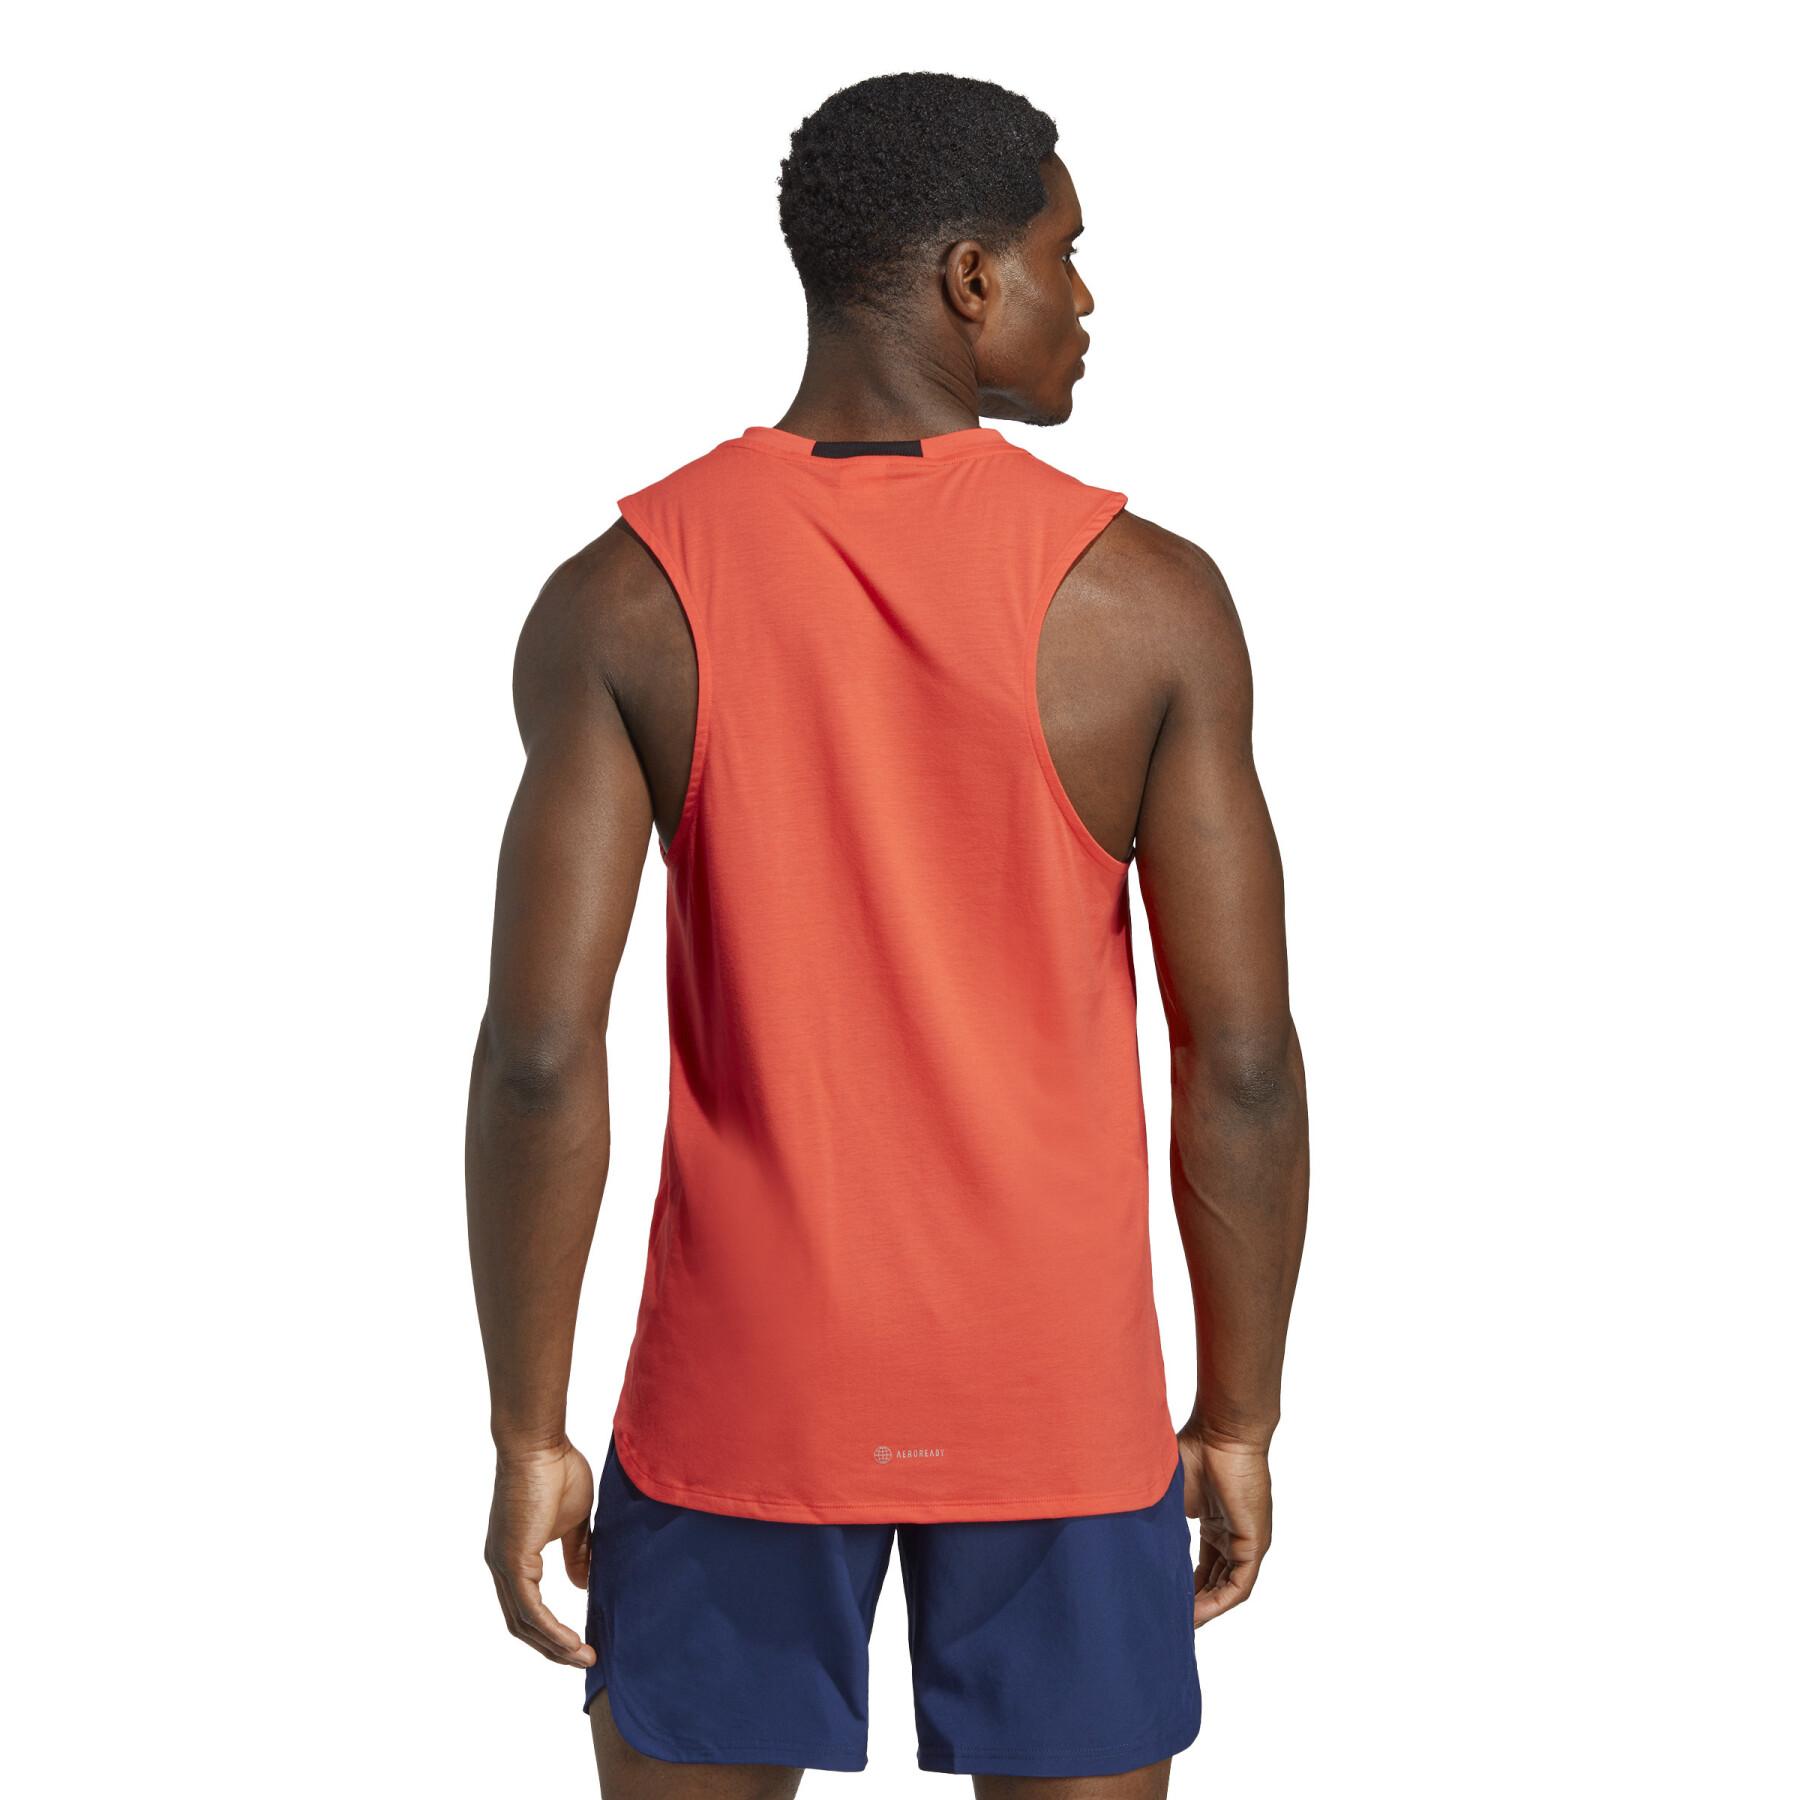 Tanktop adidas Designed for Workout